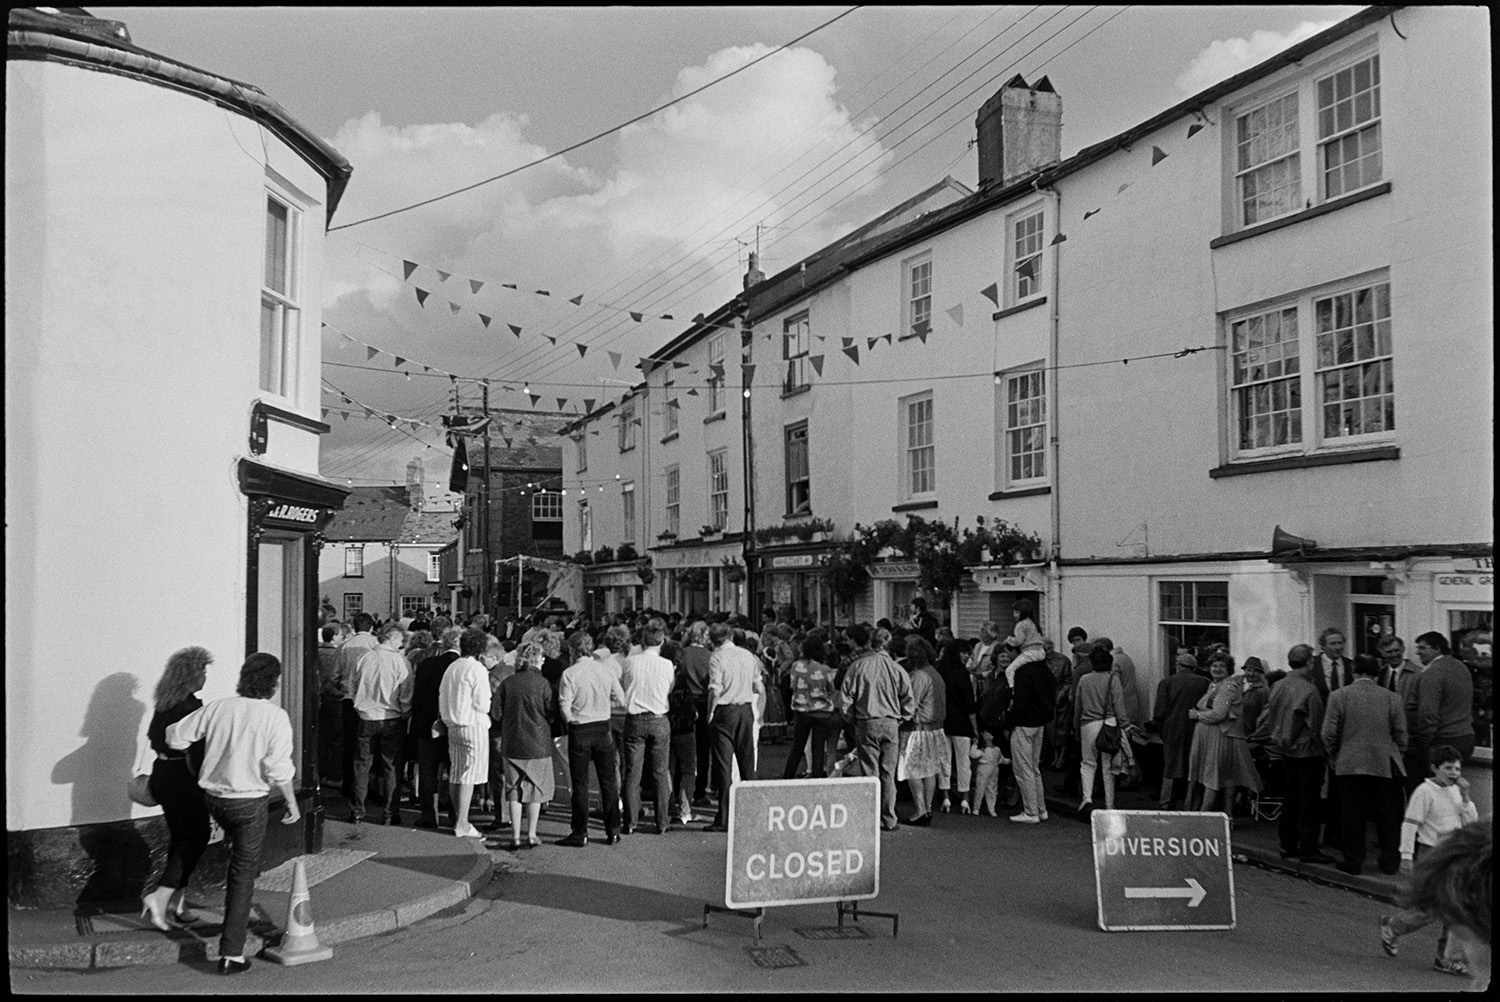 Village fair, fancy dress, crowd of onlookers, sack race. 
[Spectators gathered in a street in Chulmleigh watching events at Chulmleigh Fair. Road closed signs are visible in the foreground and the street is decorated with bunting.]